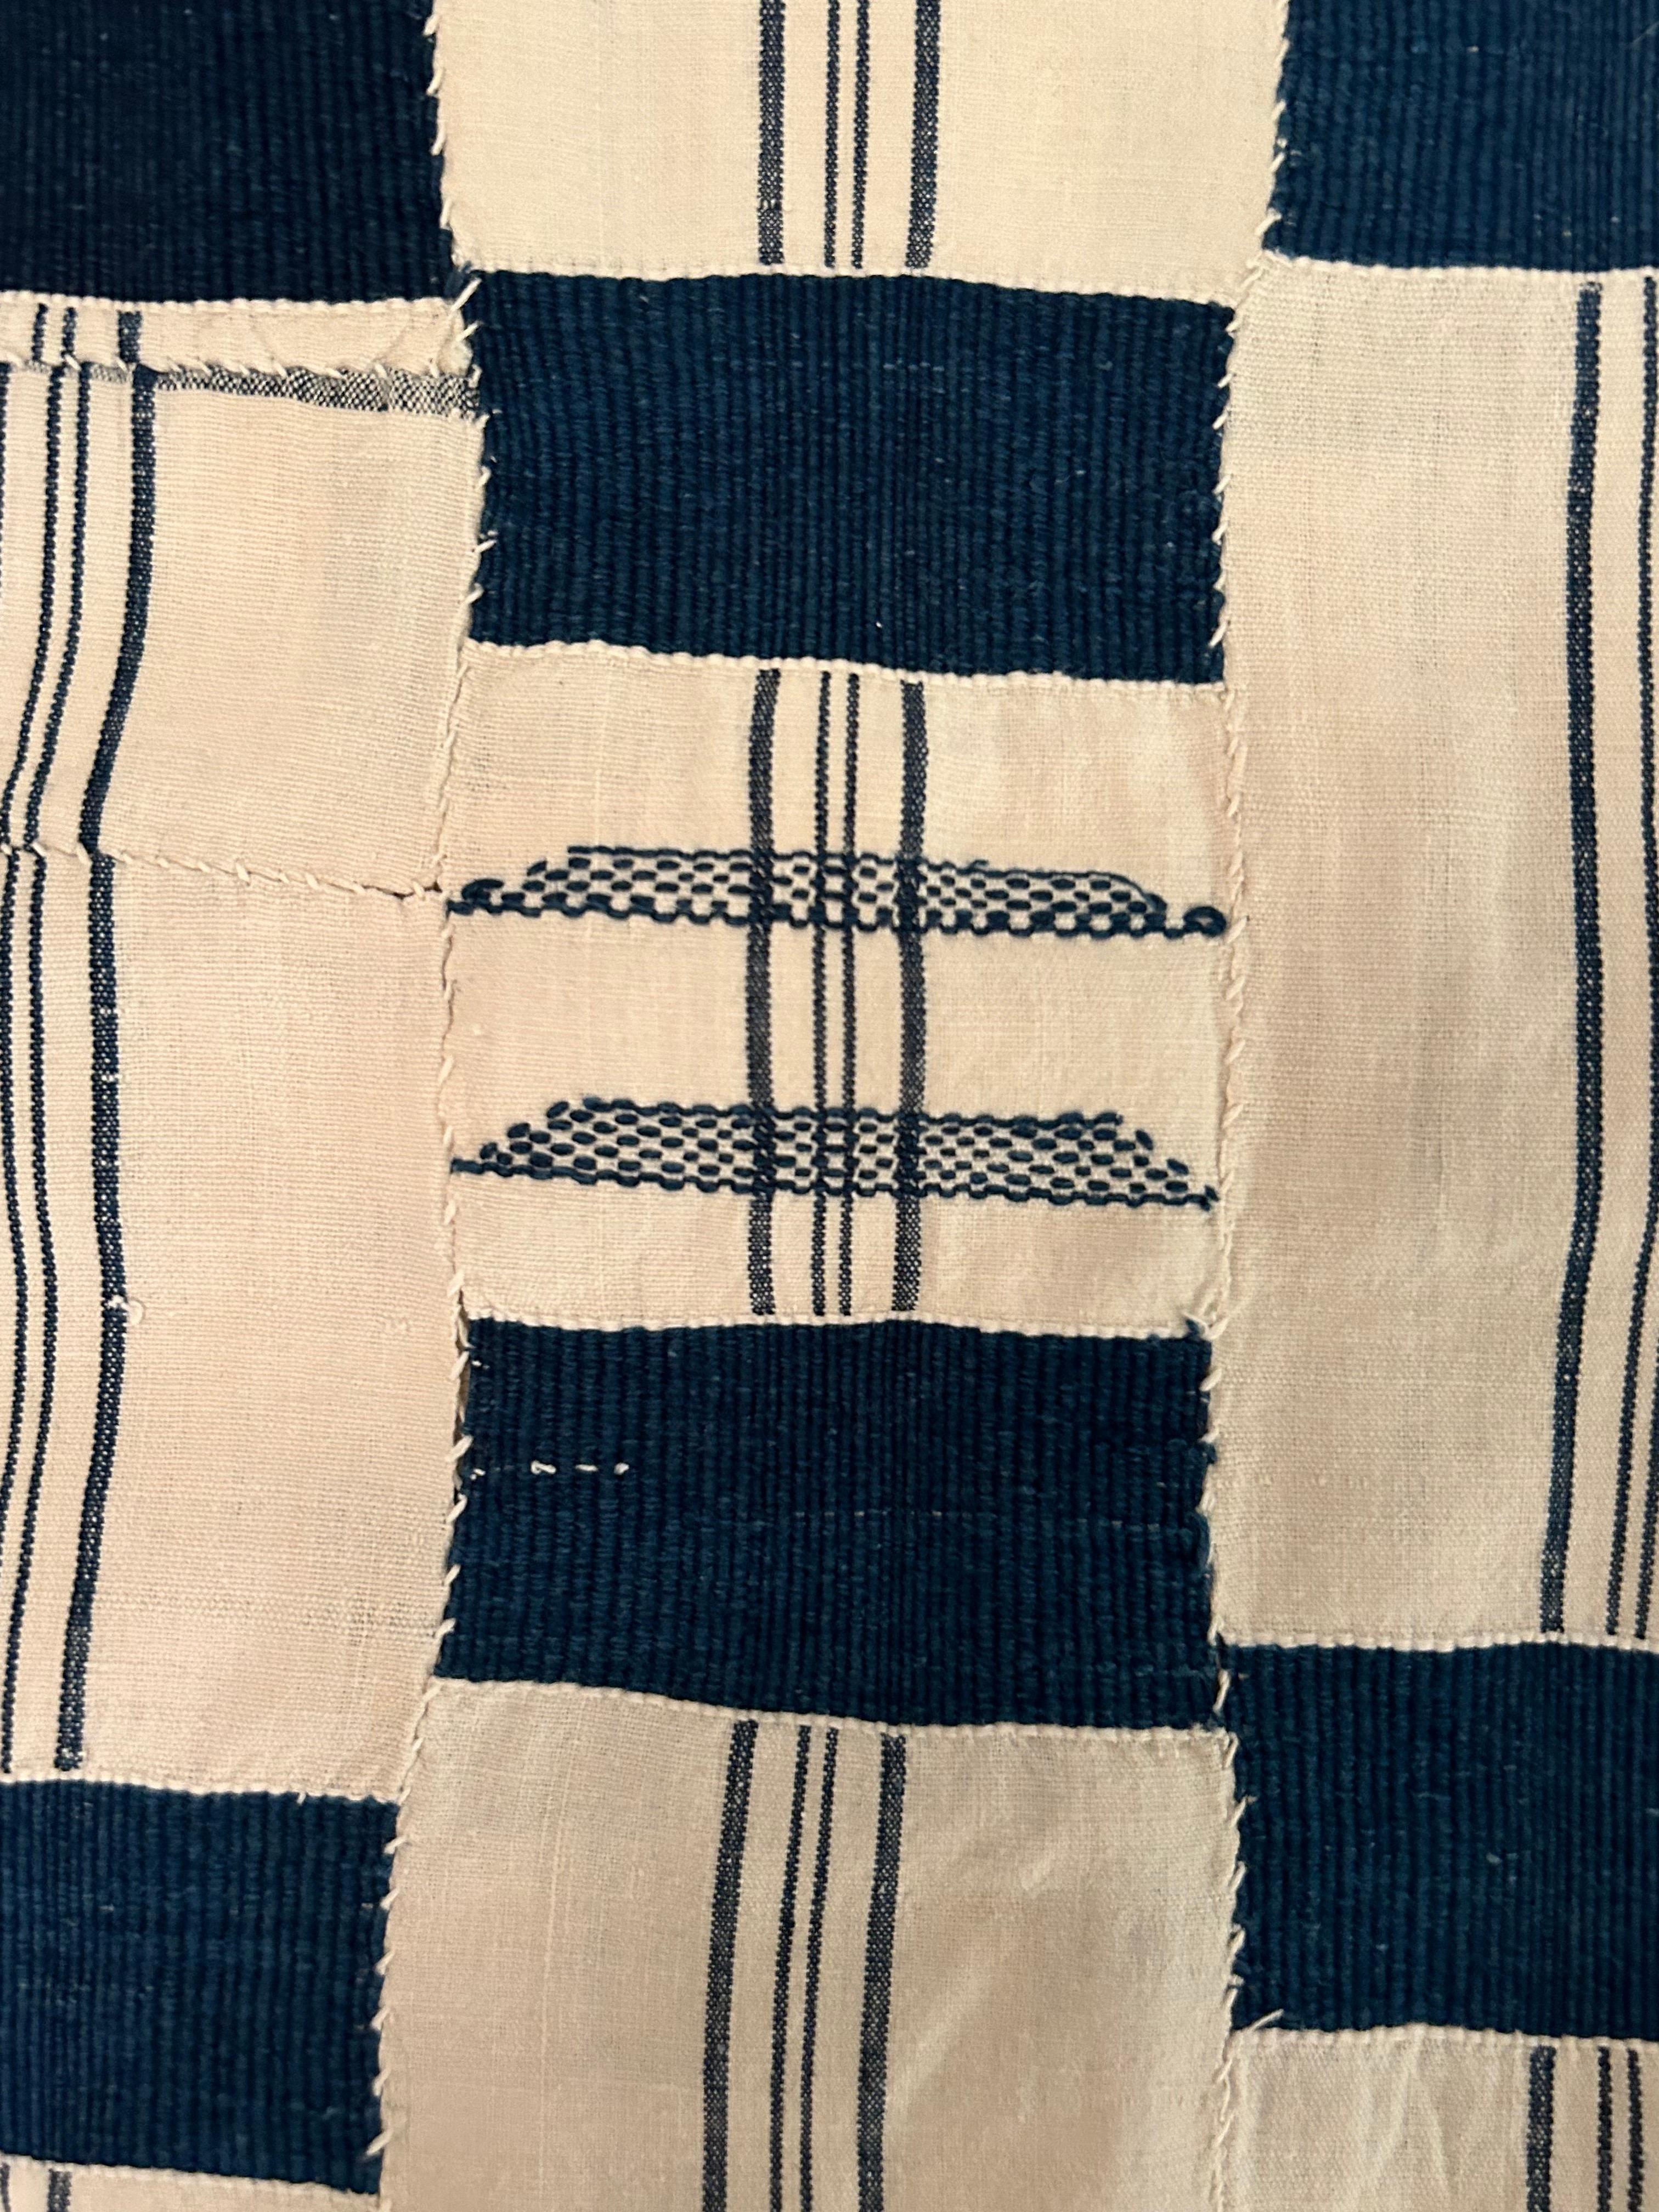 Hand-Crafted Vintage Asante Kente Textile in Blue and White, Ghana, 1930s